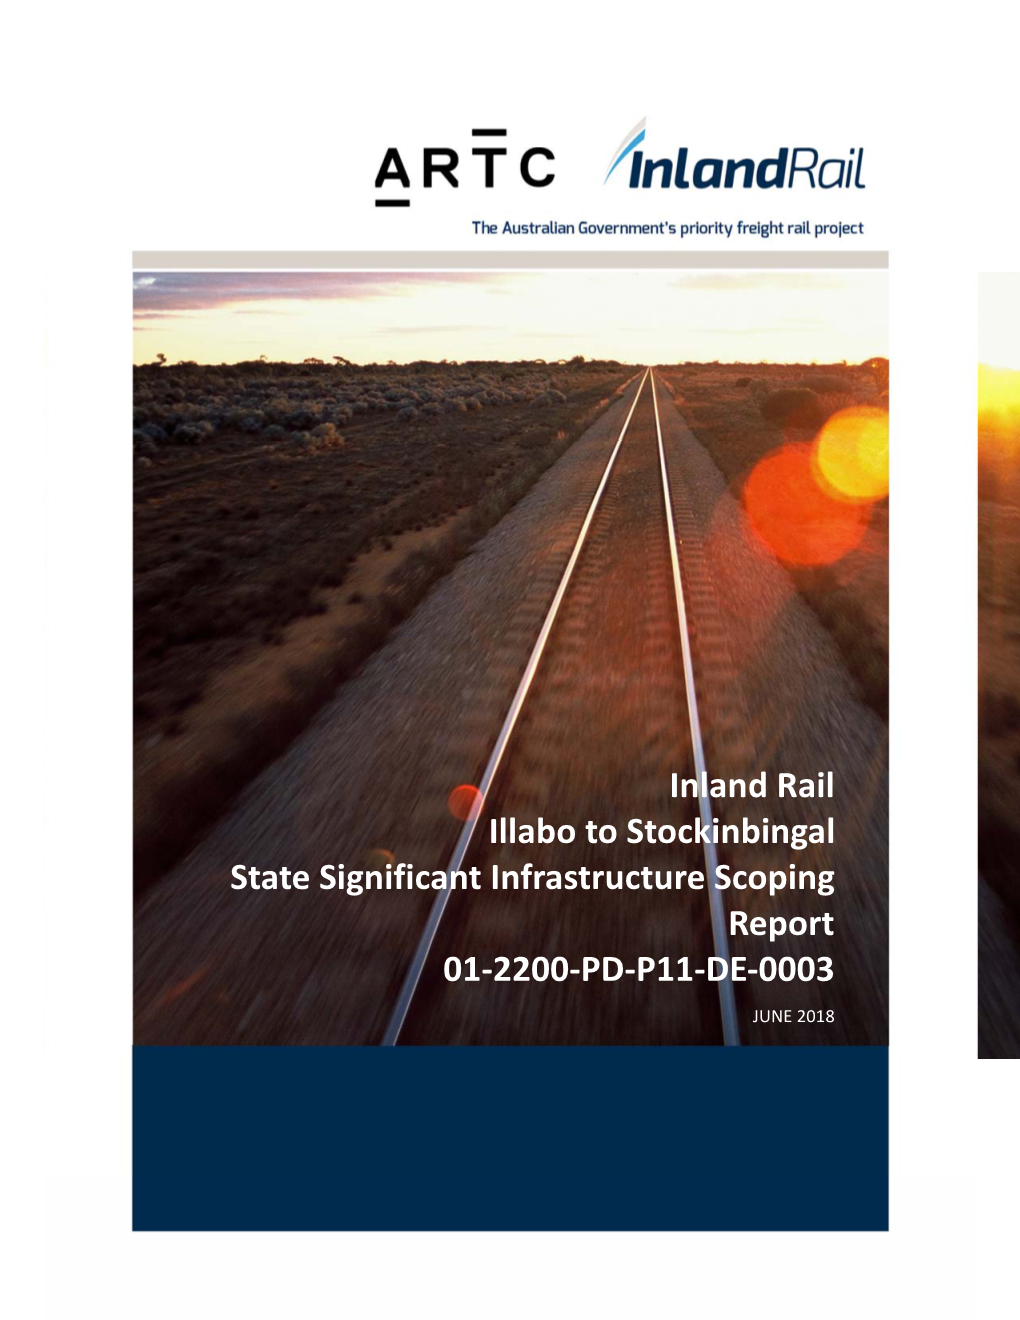 Inland Rail Illabo to Stockinbingal State Significant Infrastructure Scoping Report 01-2200-PD-P11-DE-0003 JUNE 2018